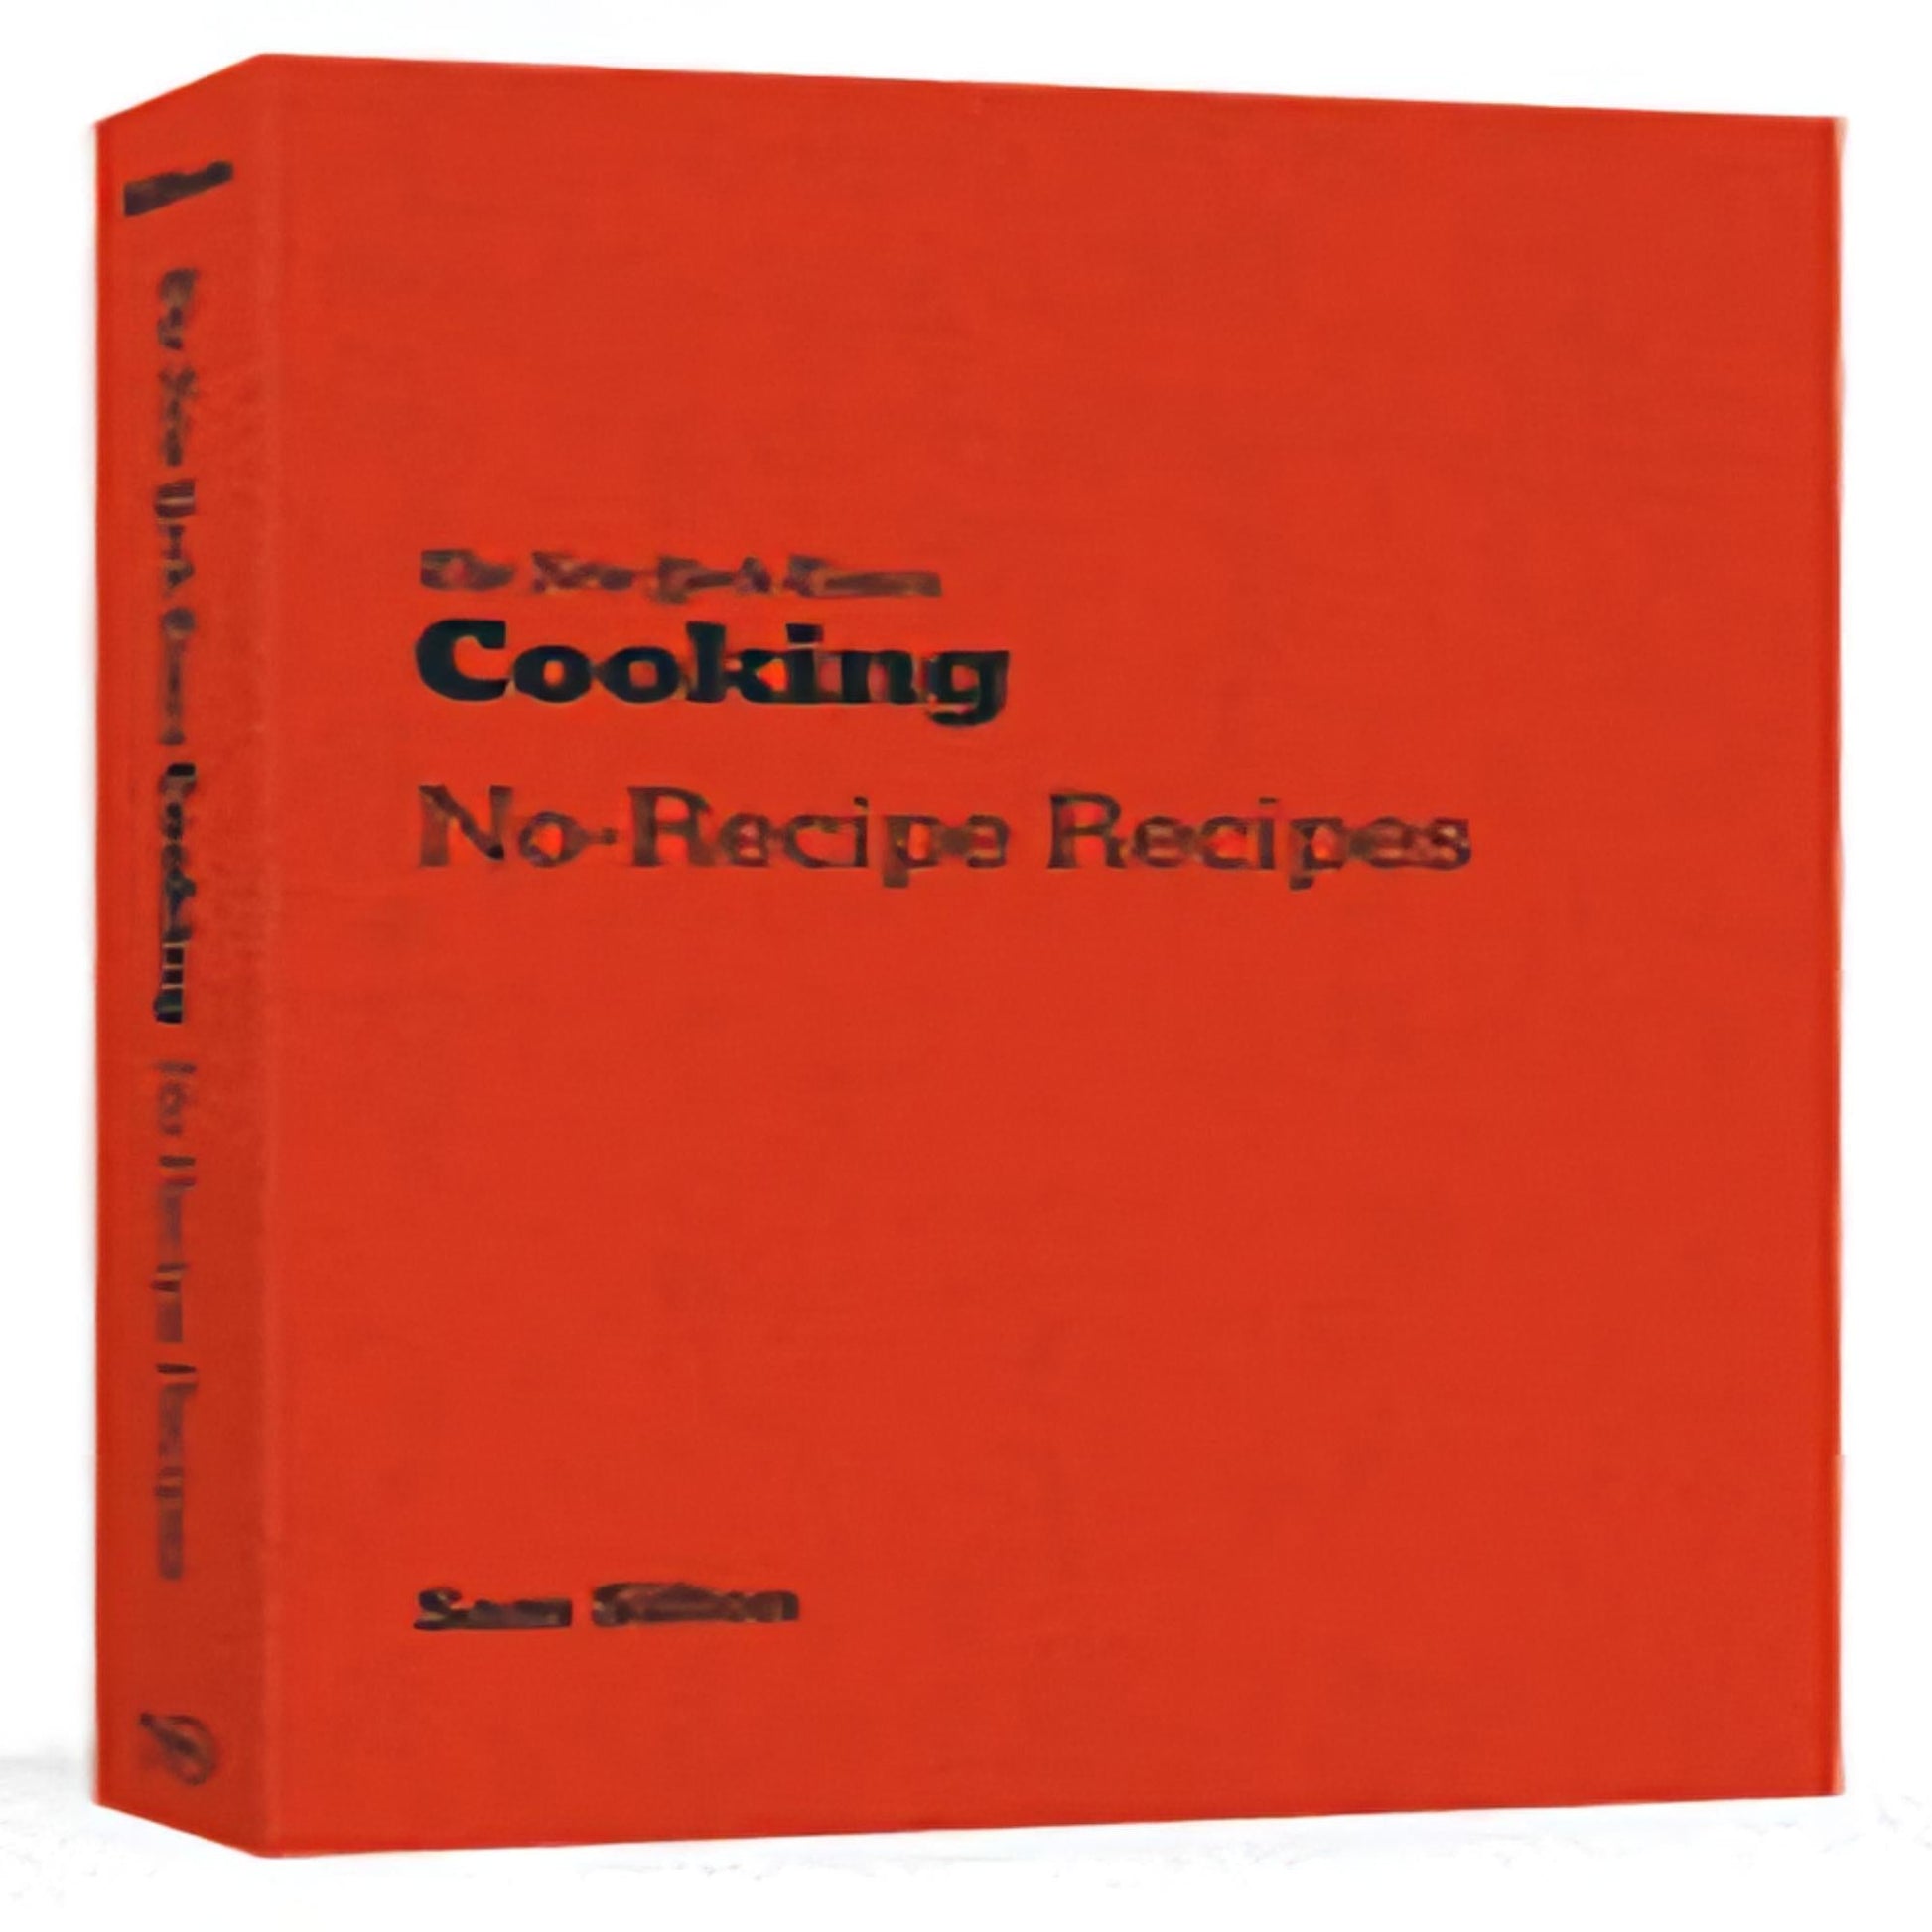 TEXTBOOK The New York Times Cooking No-Recipe Recipes: [A Cookbook]168-022723-1984858475DPGBOOKSTORE.COM. Today's Bestsellers.